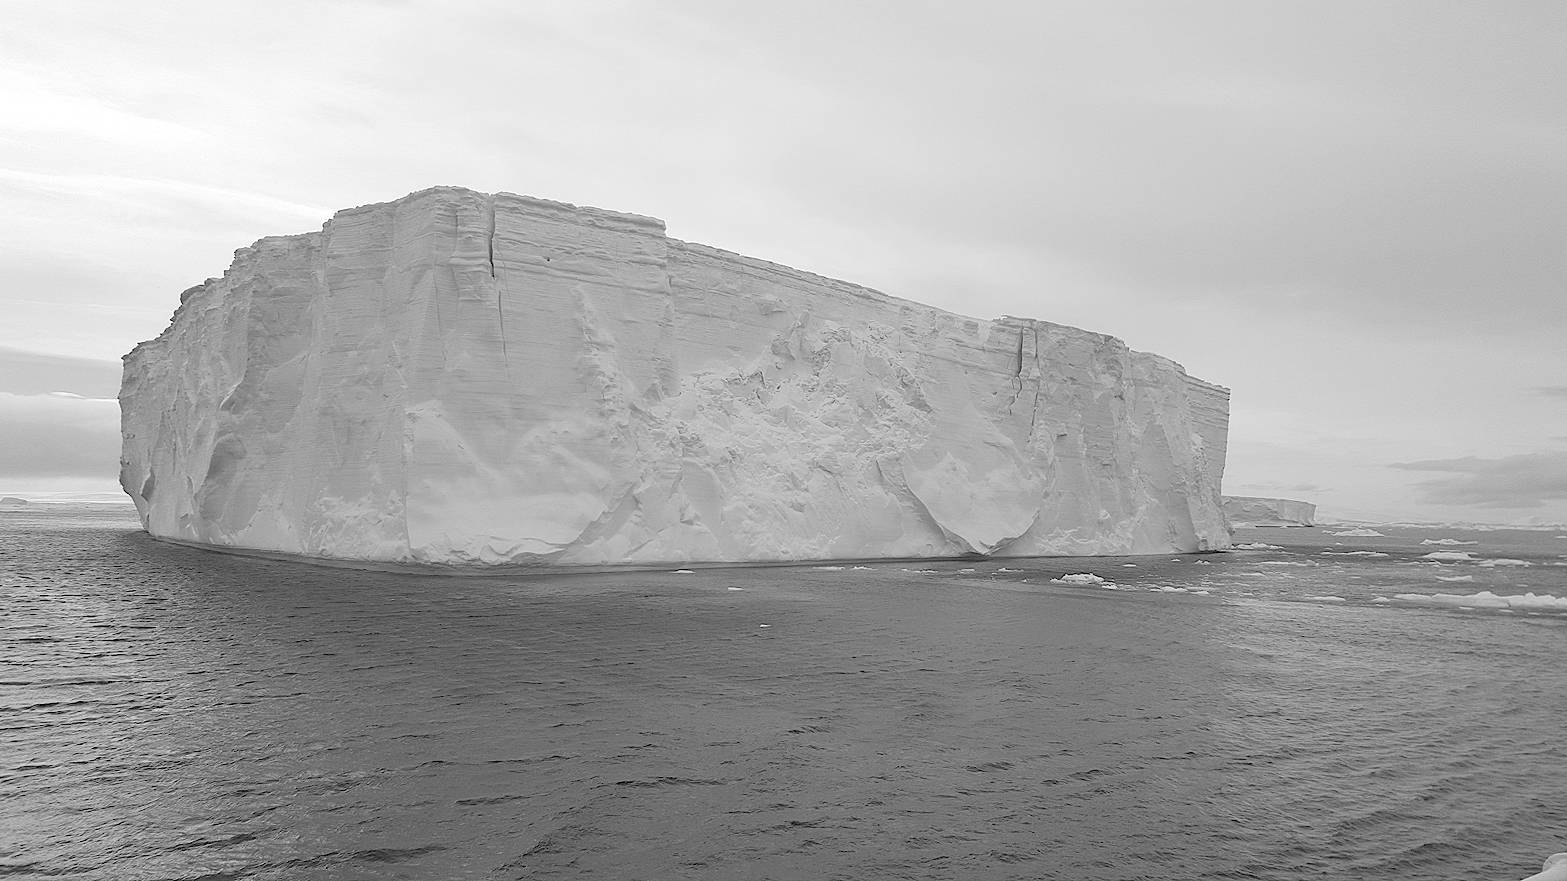 A tabular iceberg from the Larsen ice shelf sits in the Weddell Sea. (Photo courtesy of Sue Mauger)